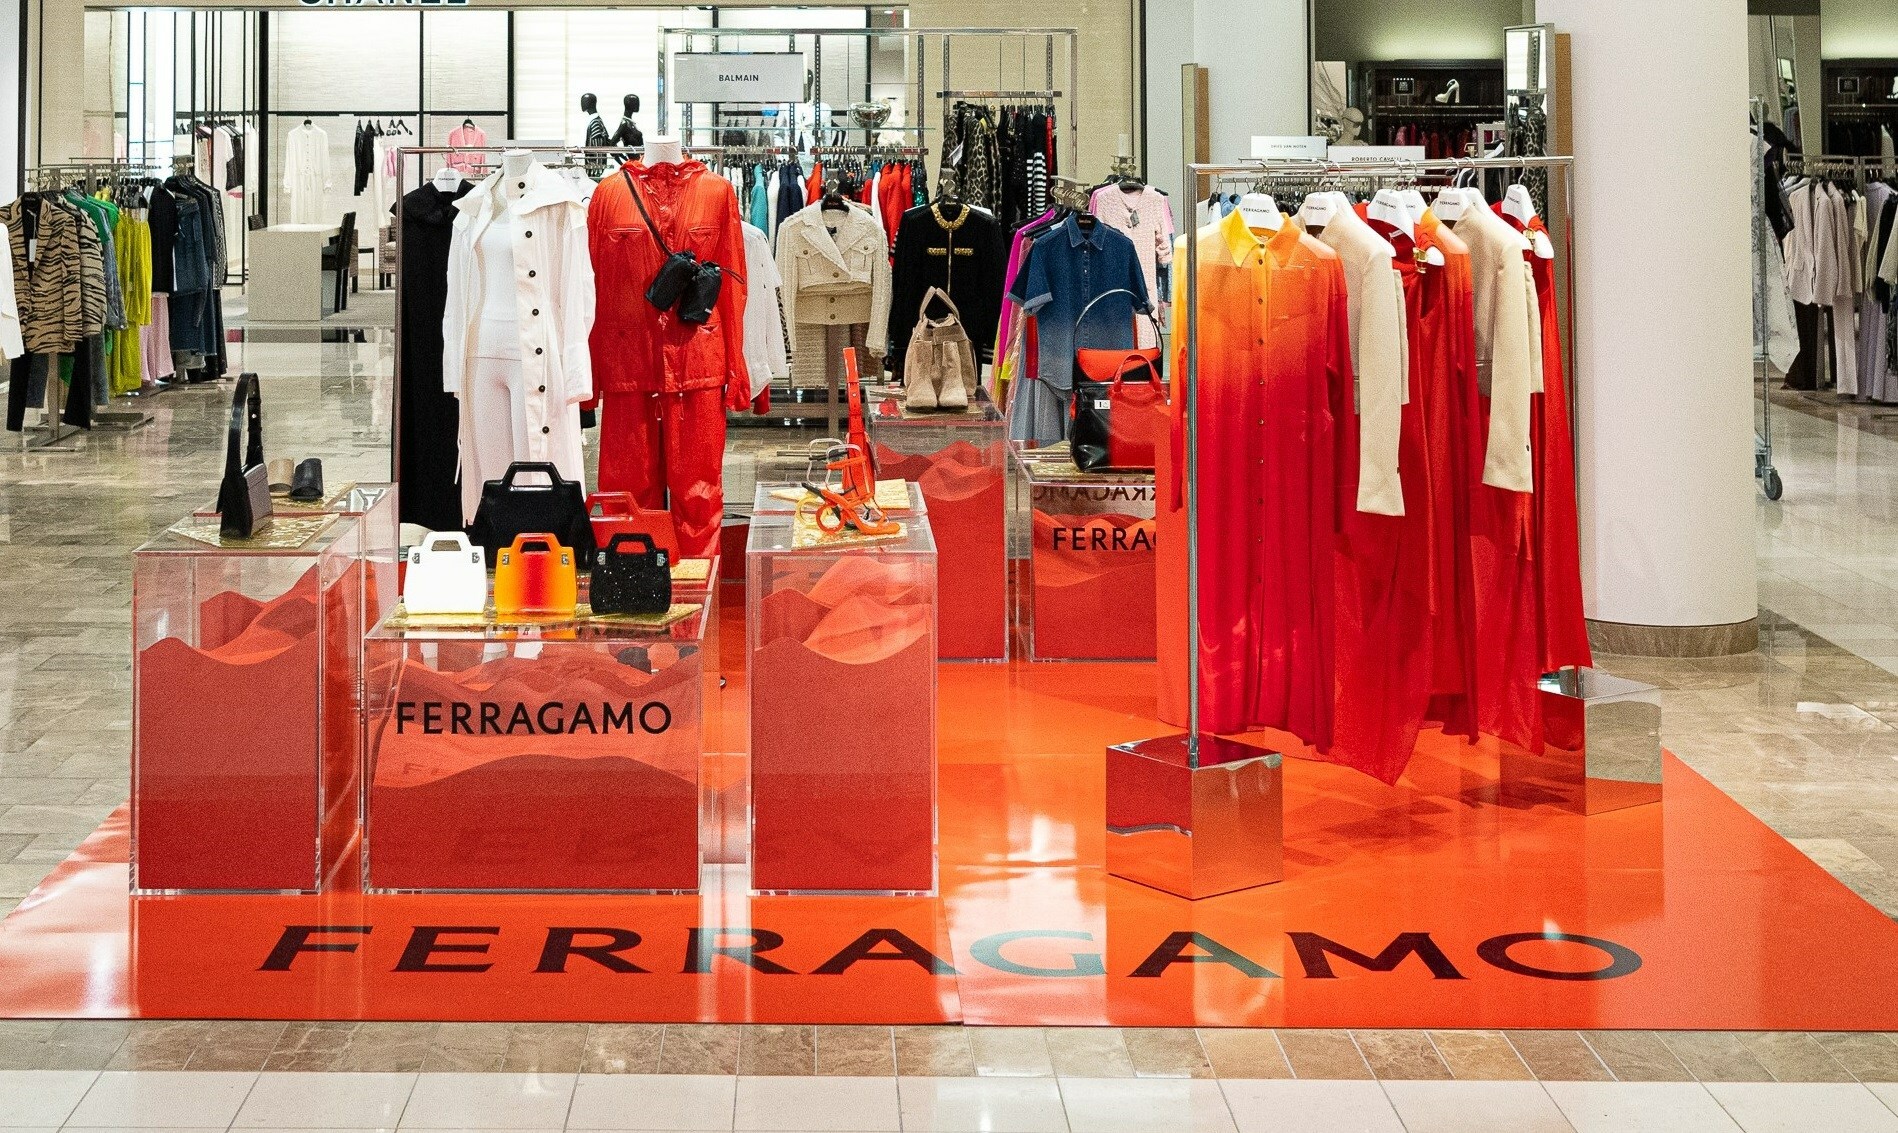 Neiman Marcus Expands to New Categories, Offering Exclusive